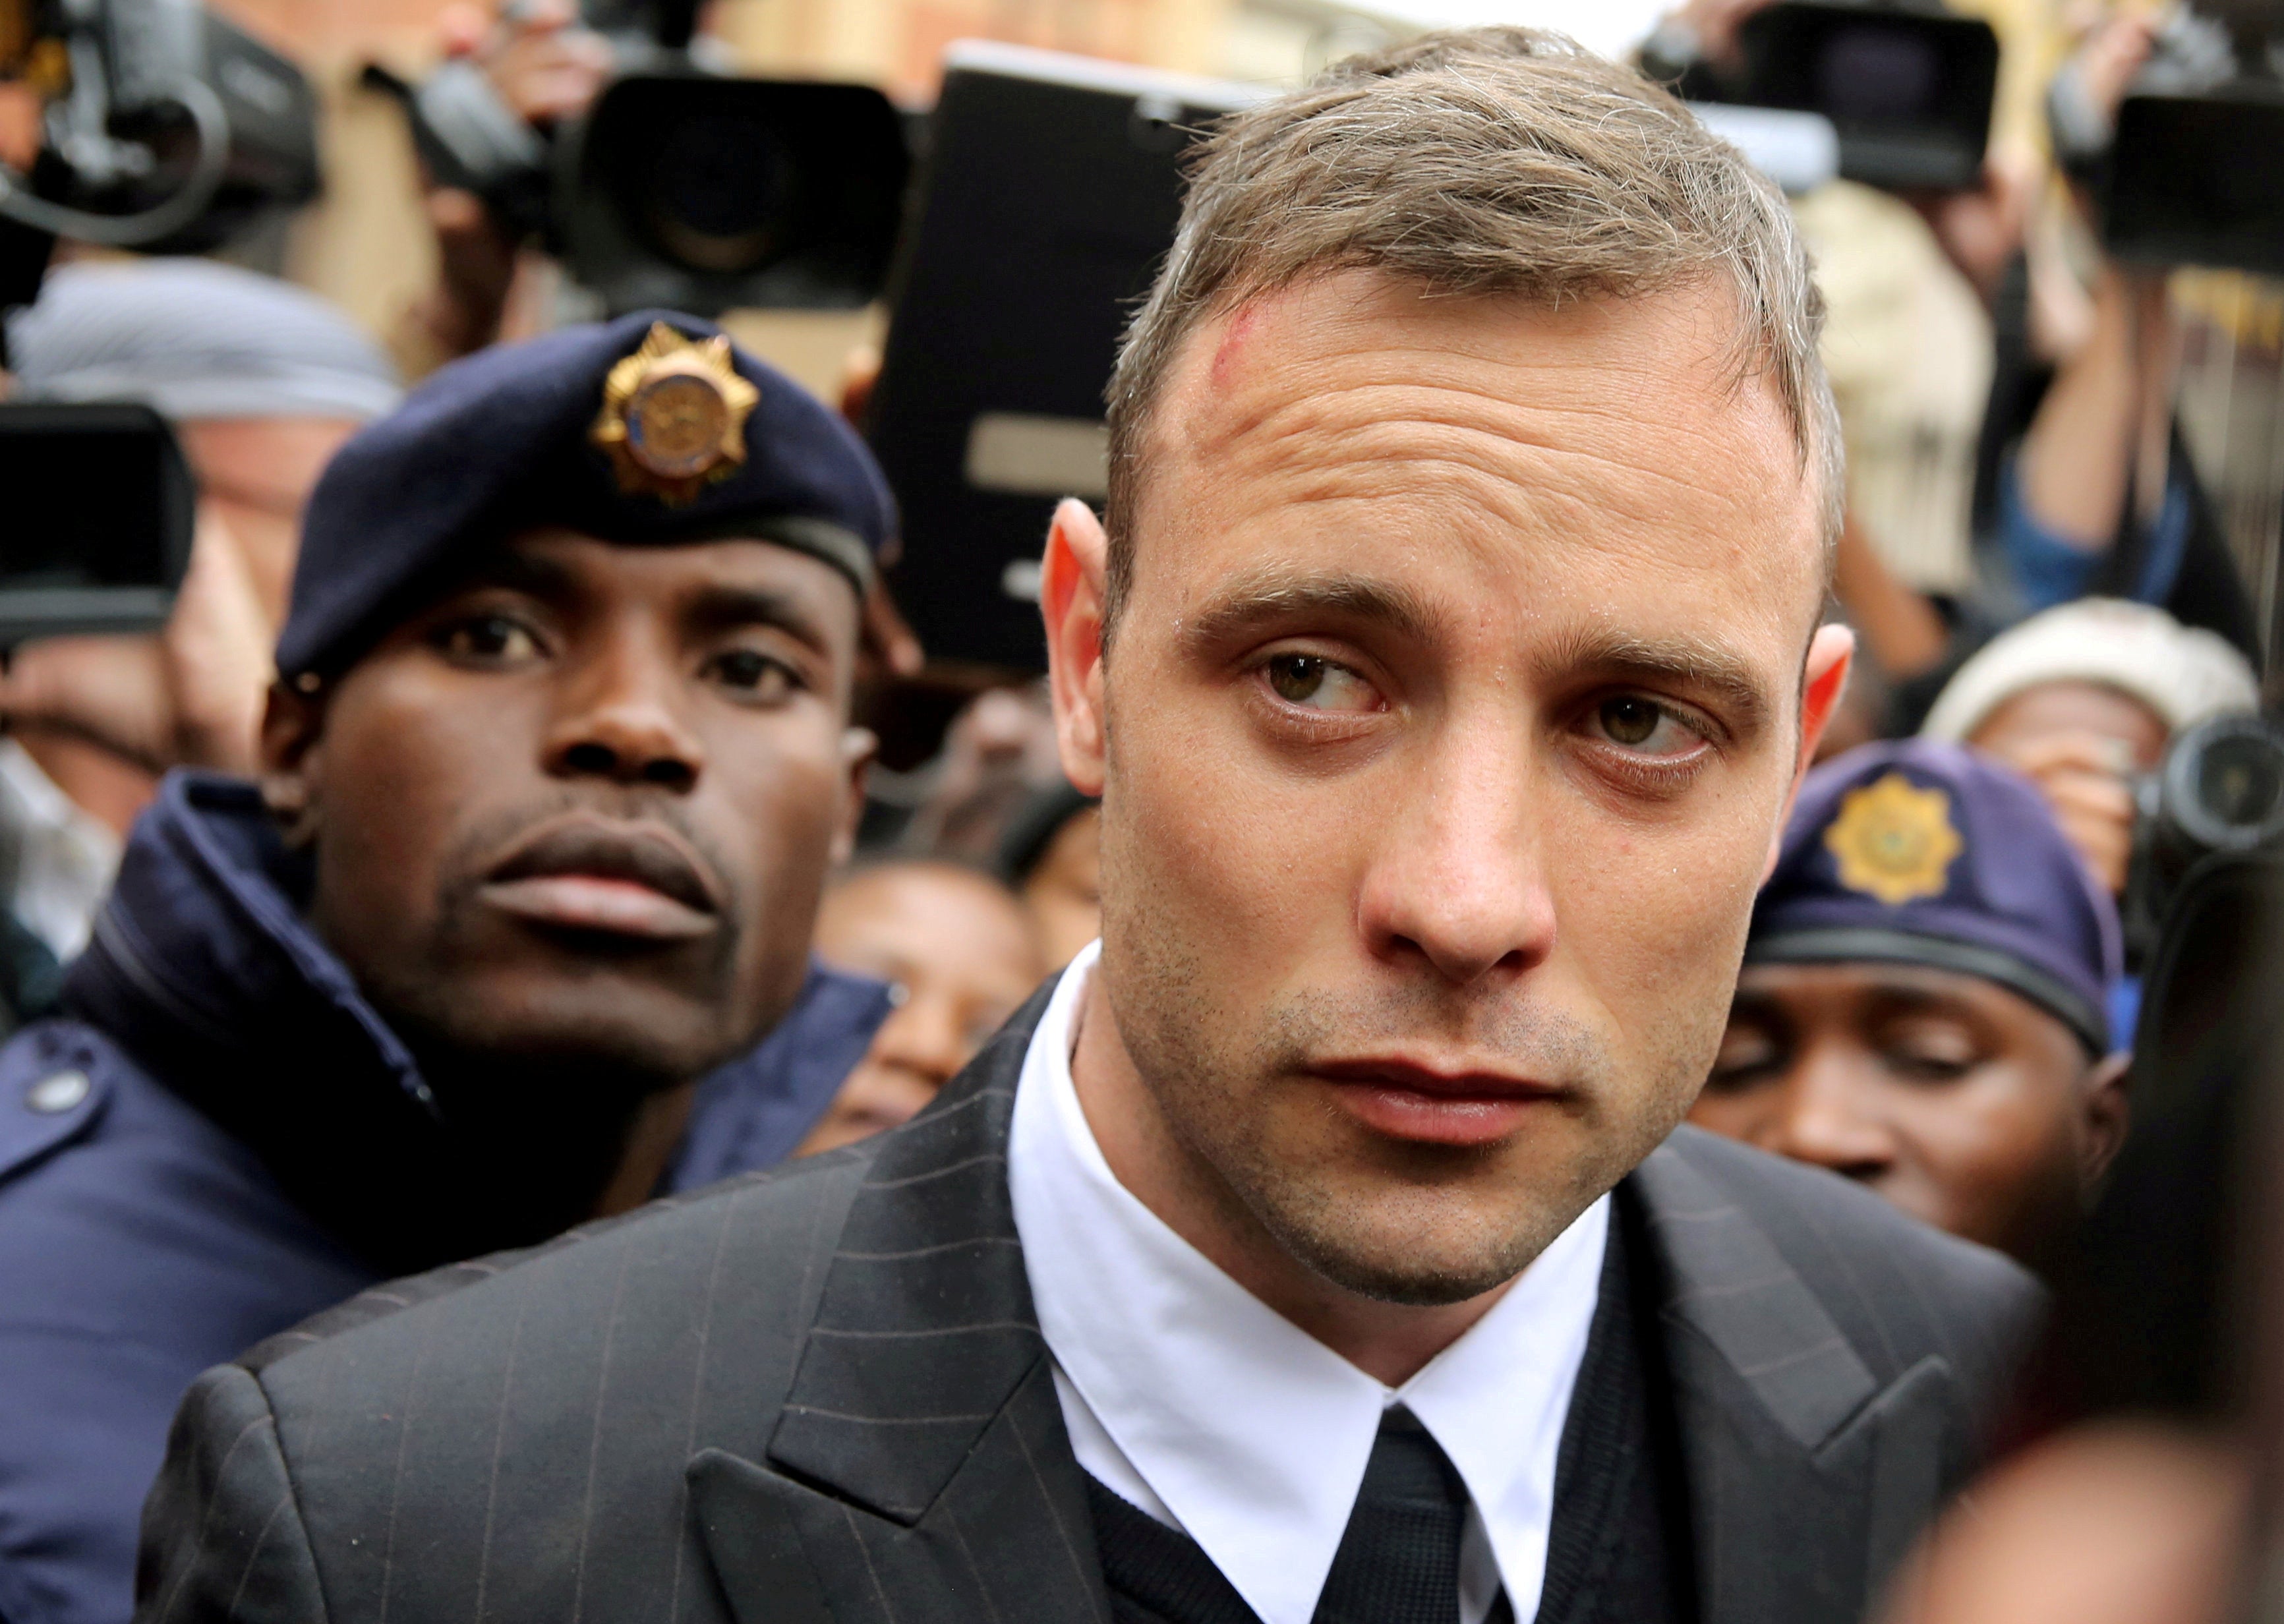 File photo: Oscar Pistorius leaves court after appearing for the 2013 killing of his girlfriend Reeva Steenkamp